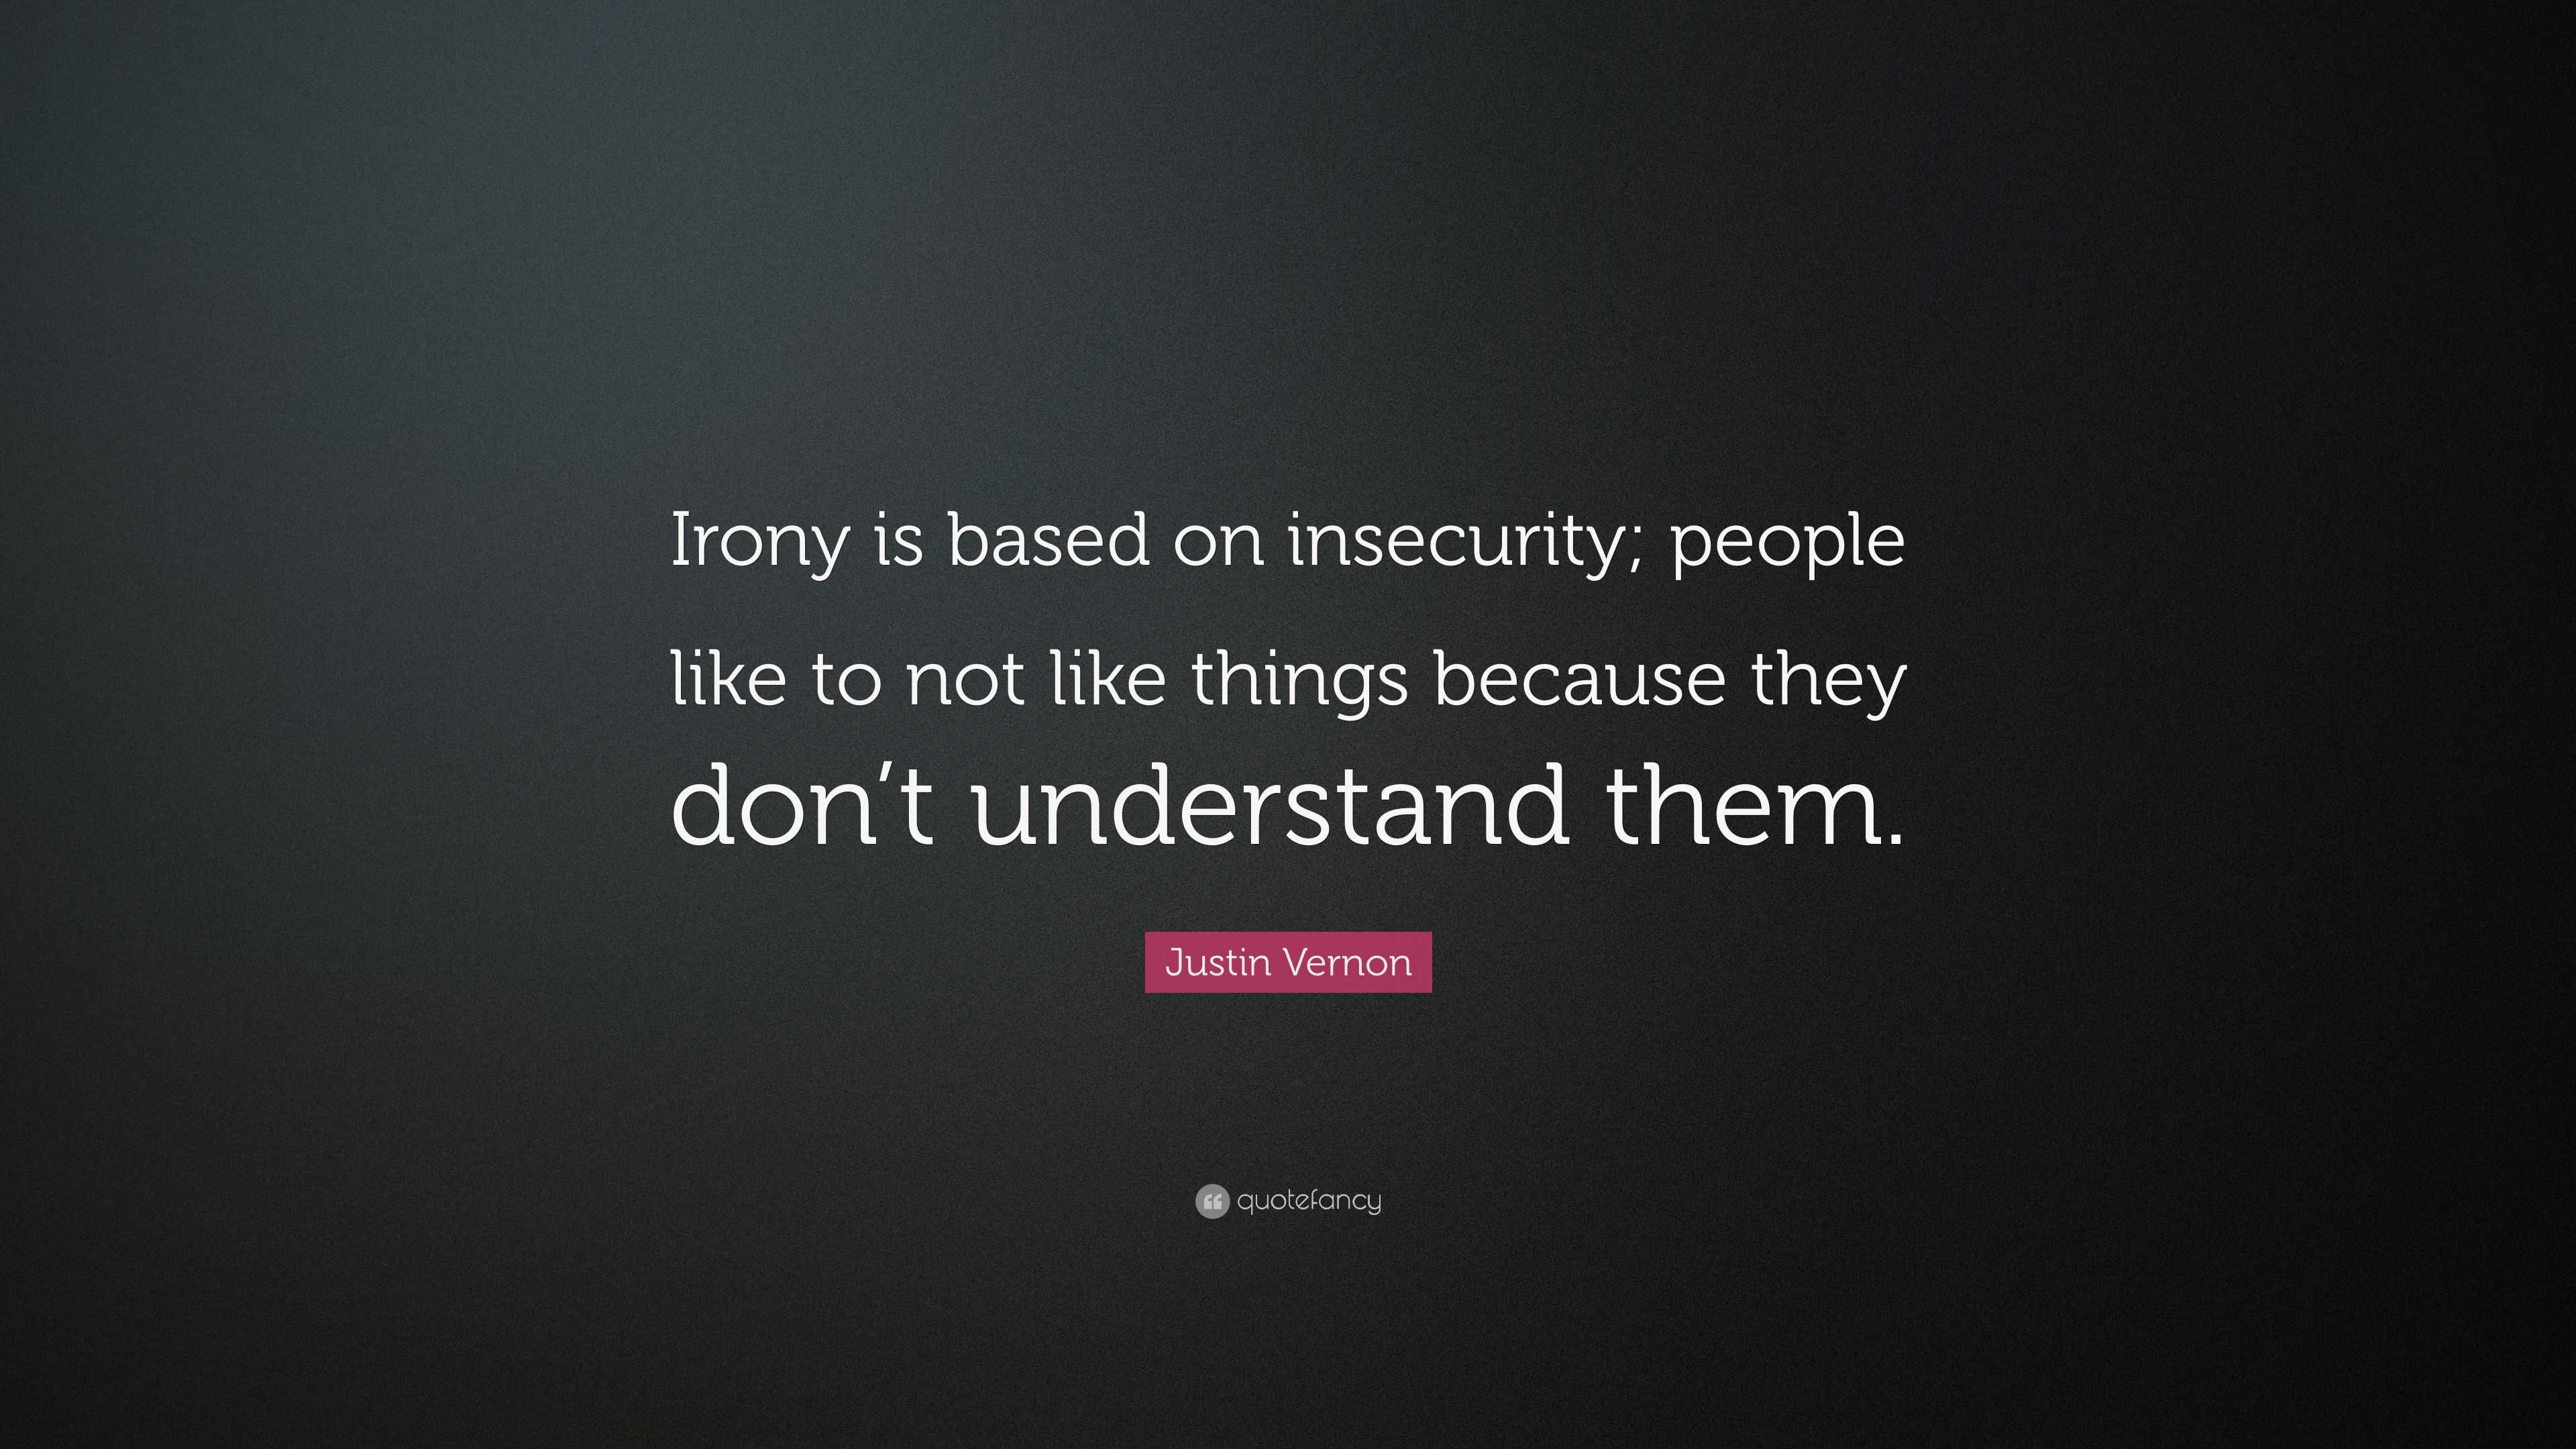 Justin Vernon Quote: “Irony is based on insecurity; people like to not ...